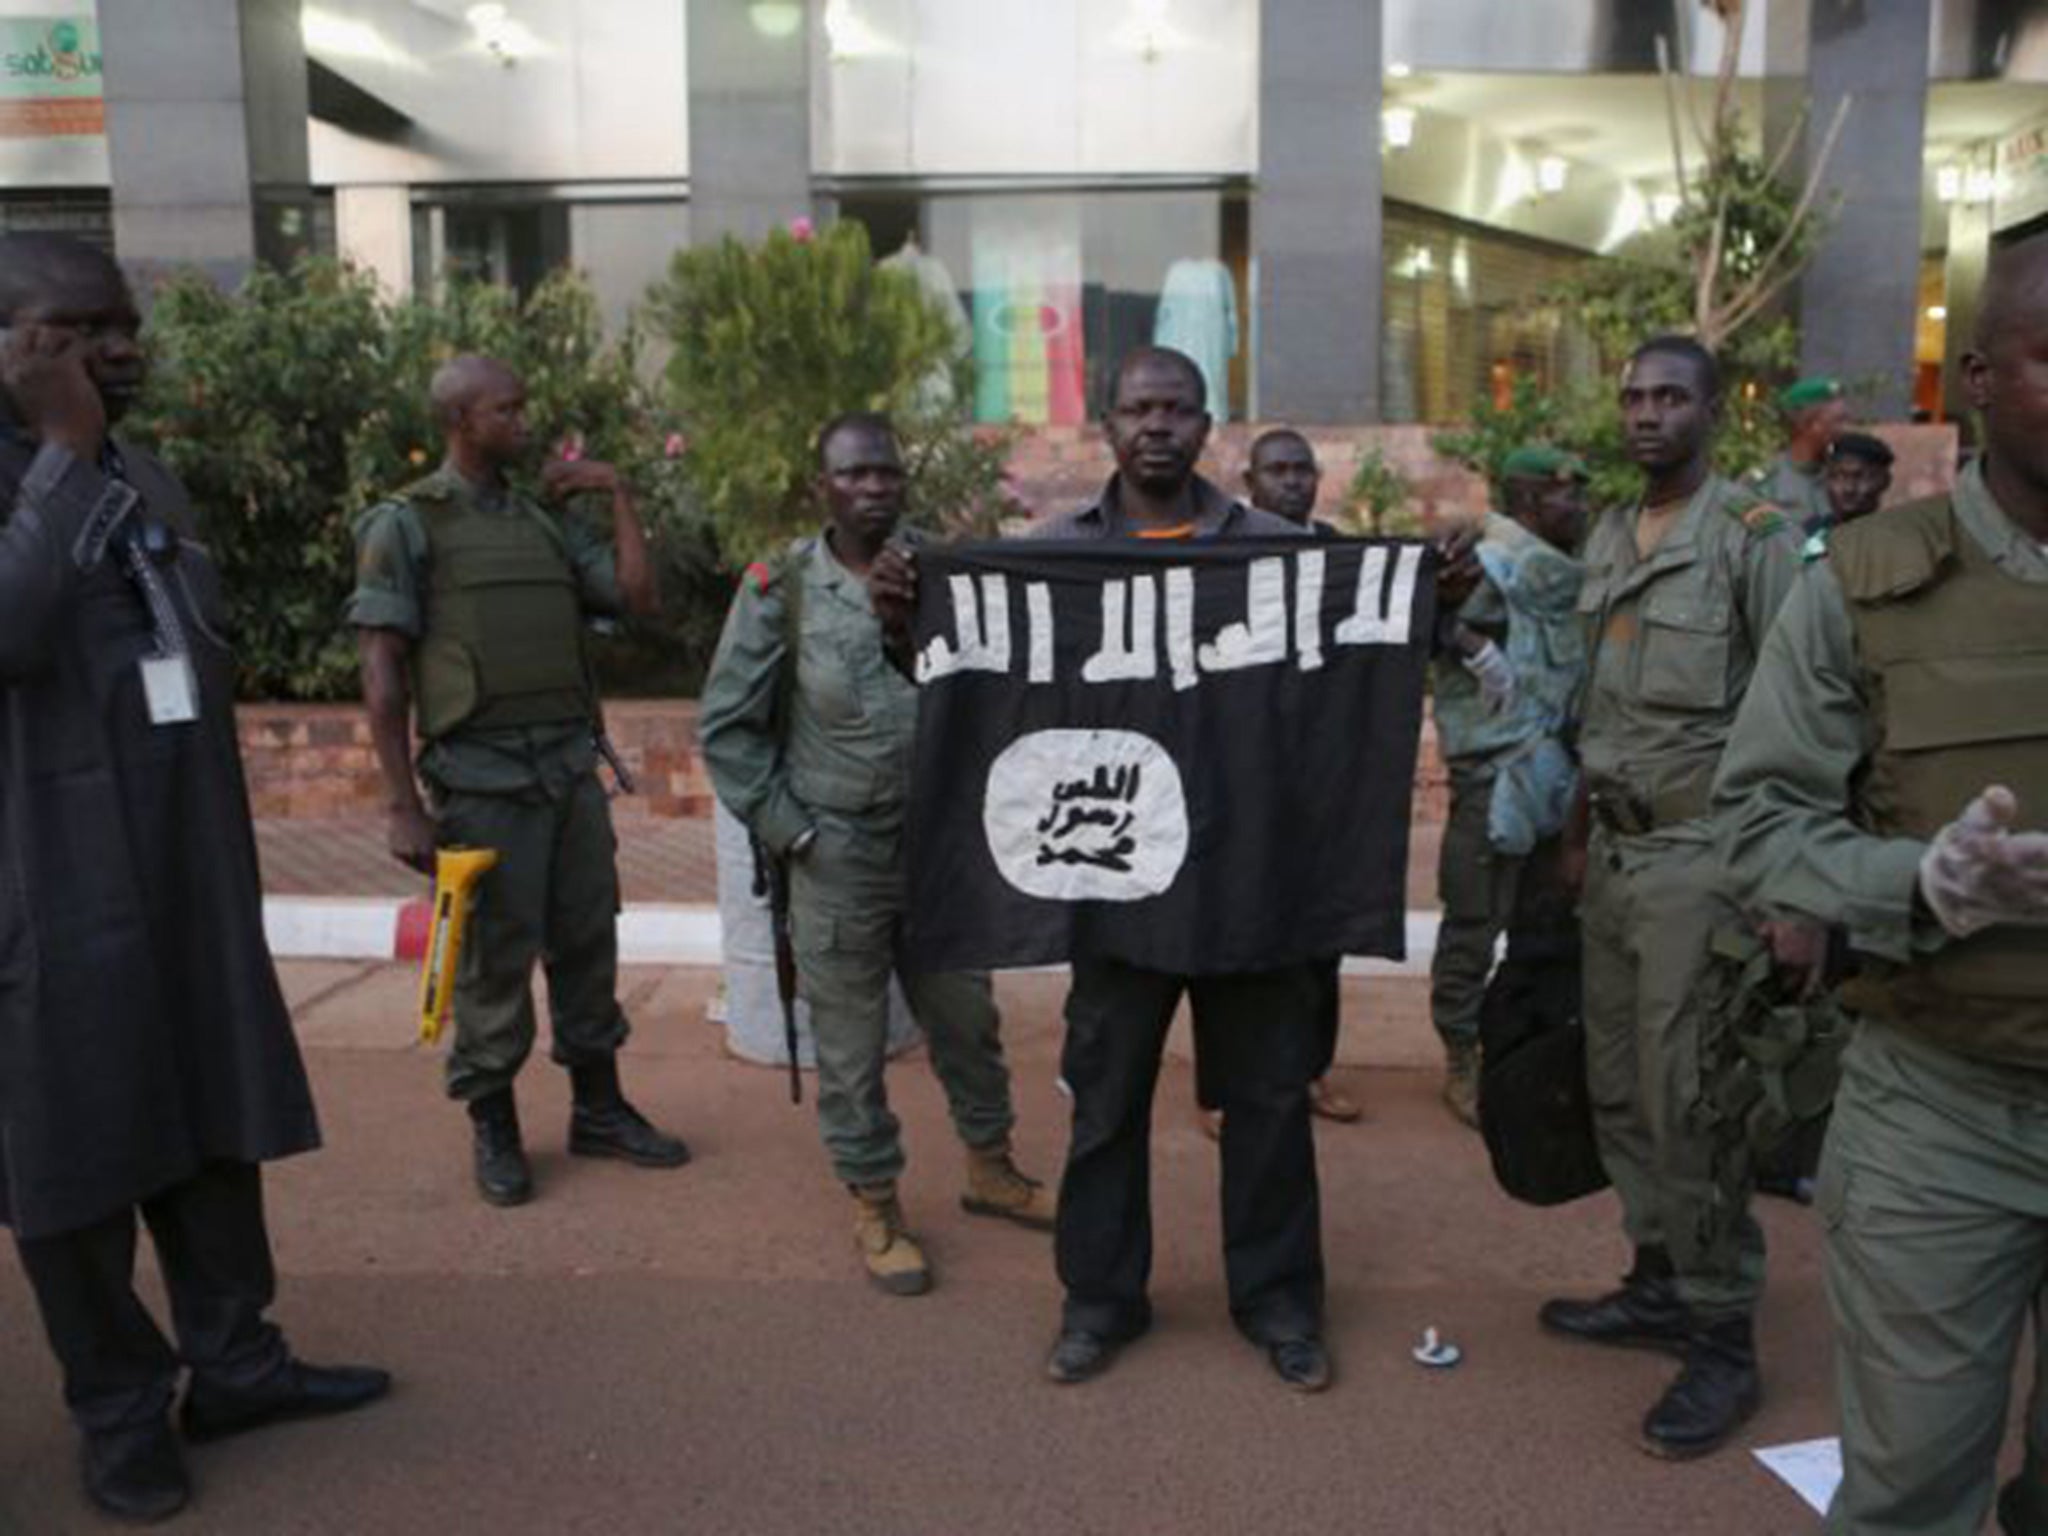 Malian security officials show a jihadist flag they said belonged to attackers in front of the Radisson hotel in Bamako